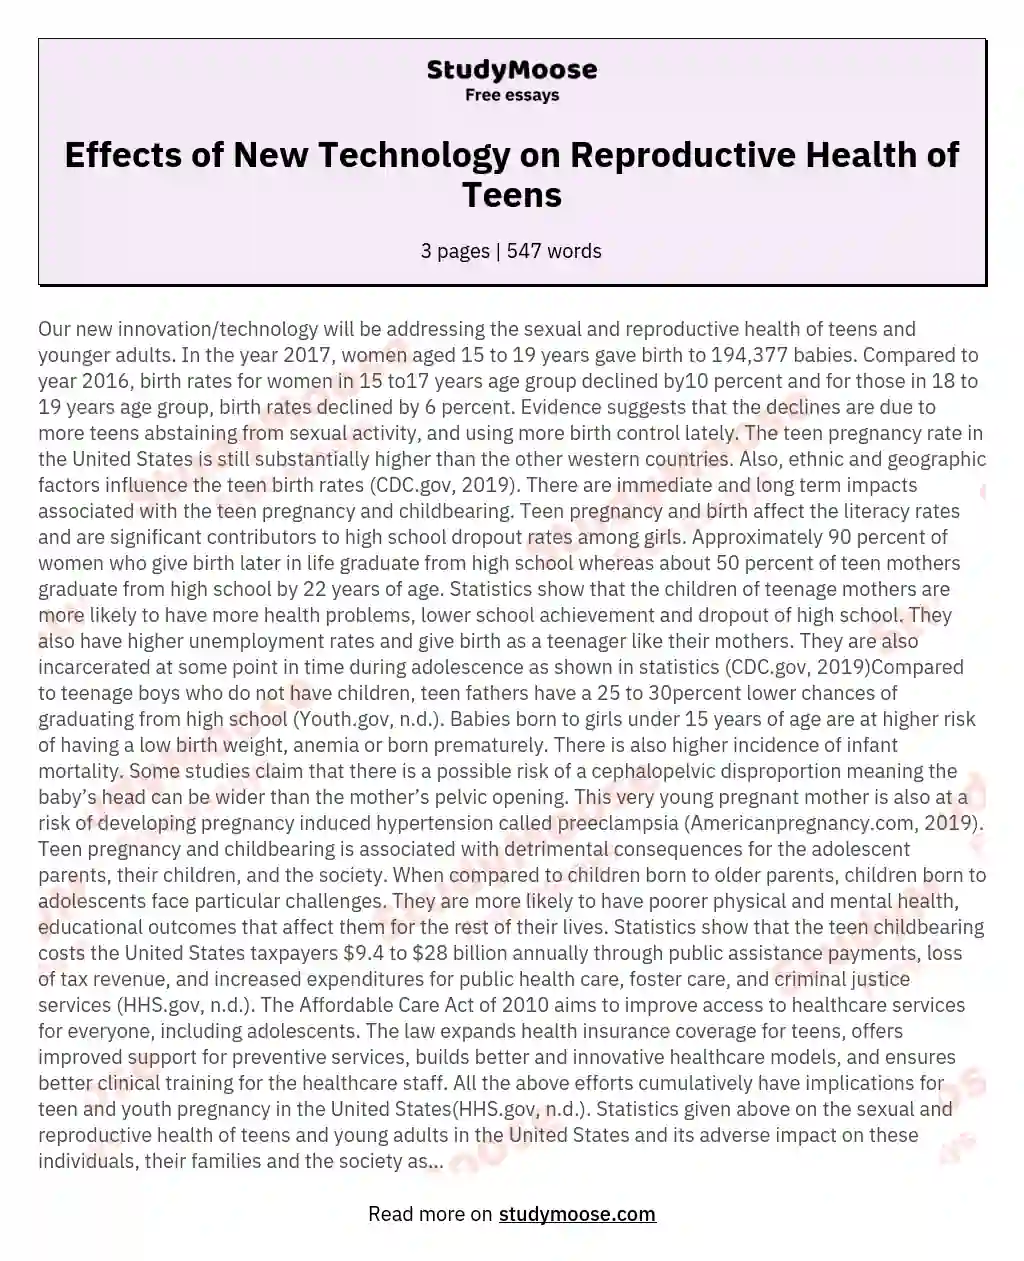 Effects of New Technology on Reproductive Health of Teens